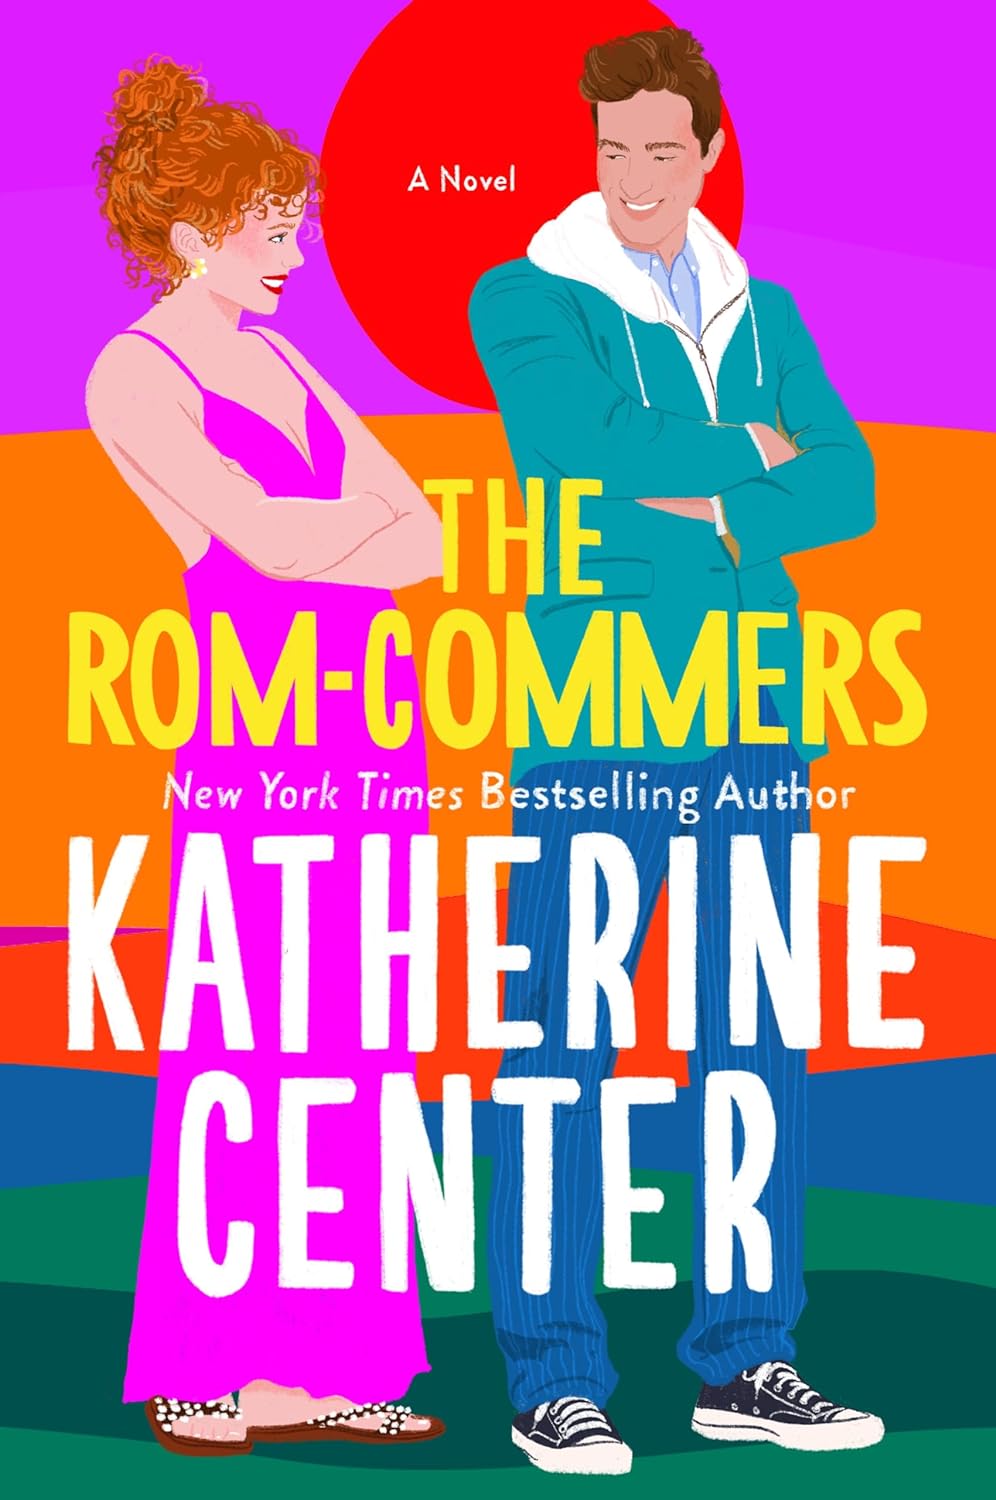 The Rom-Commers - by Katherine Center (Hardcover)